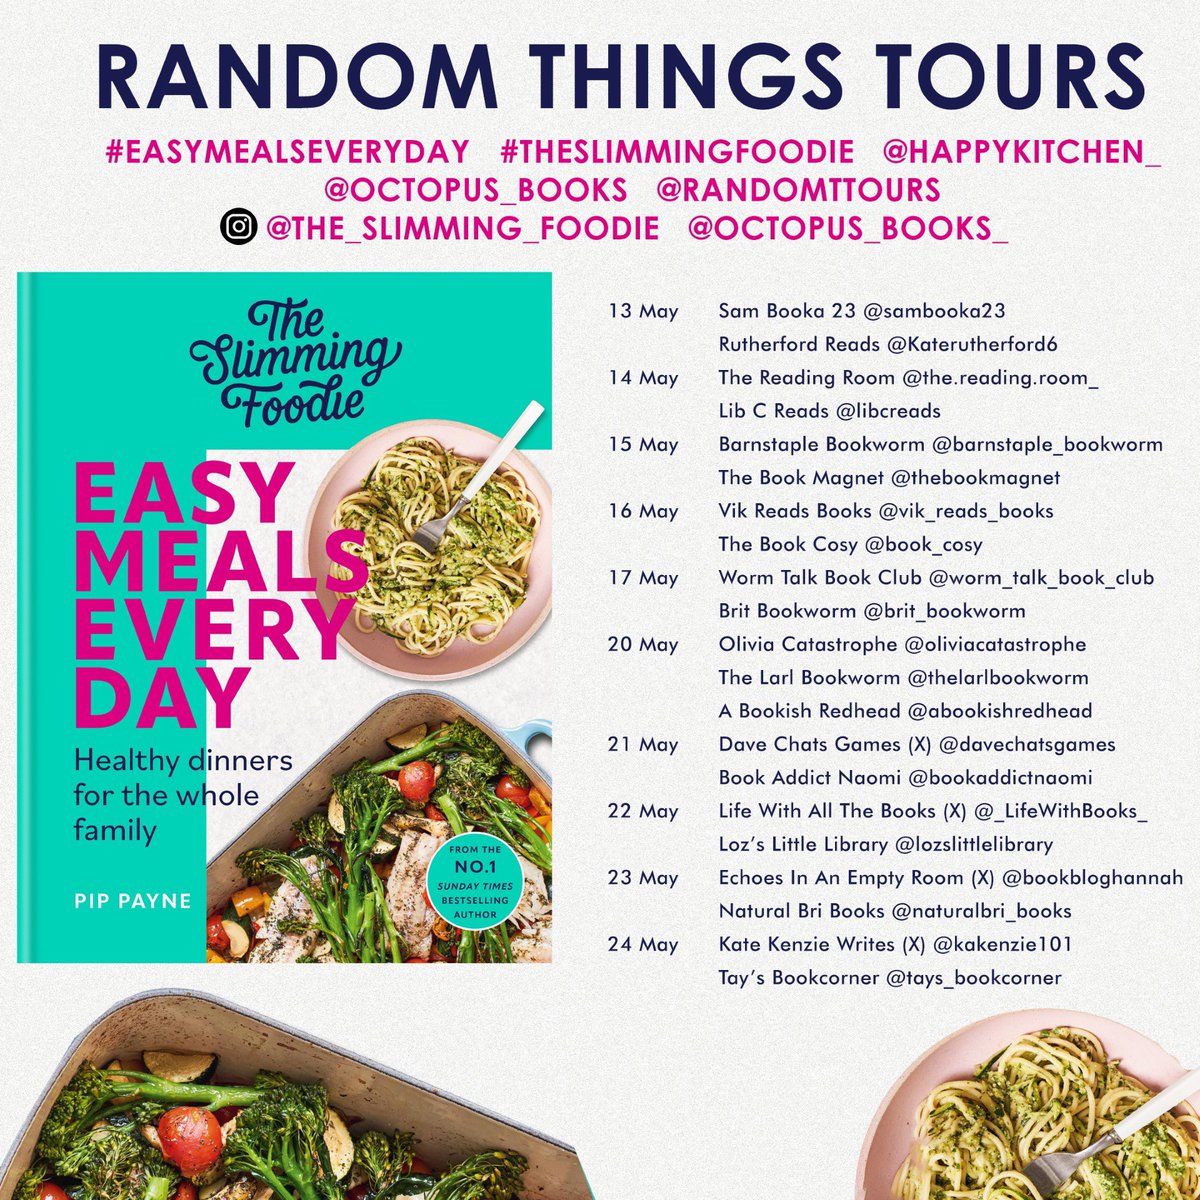 I’m delighted to share my thoughts and cookery on the latest in #TheSlimmingFoodie series, #EasyMealsEveryDay @happykitchen_ @Octopus_Books @RandomTTours wp.me/pcGudW-1qZ